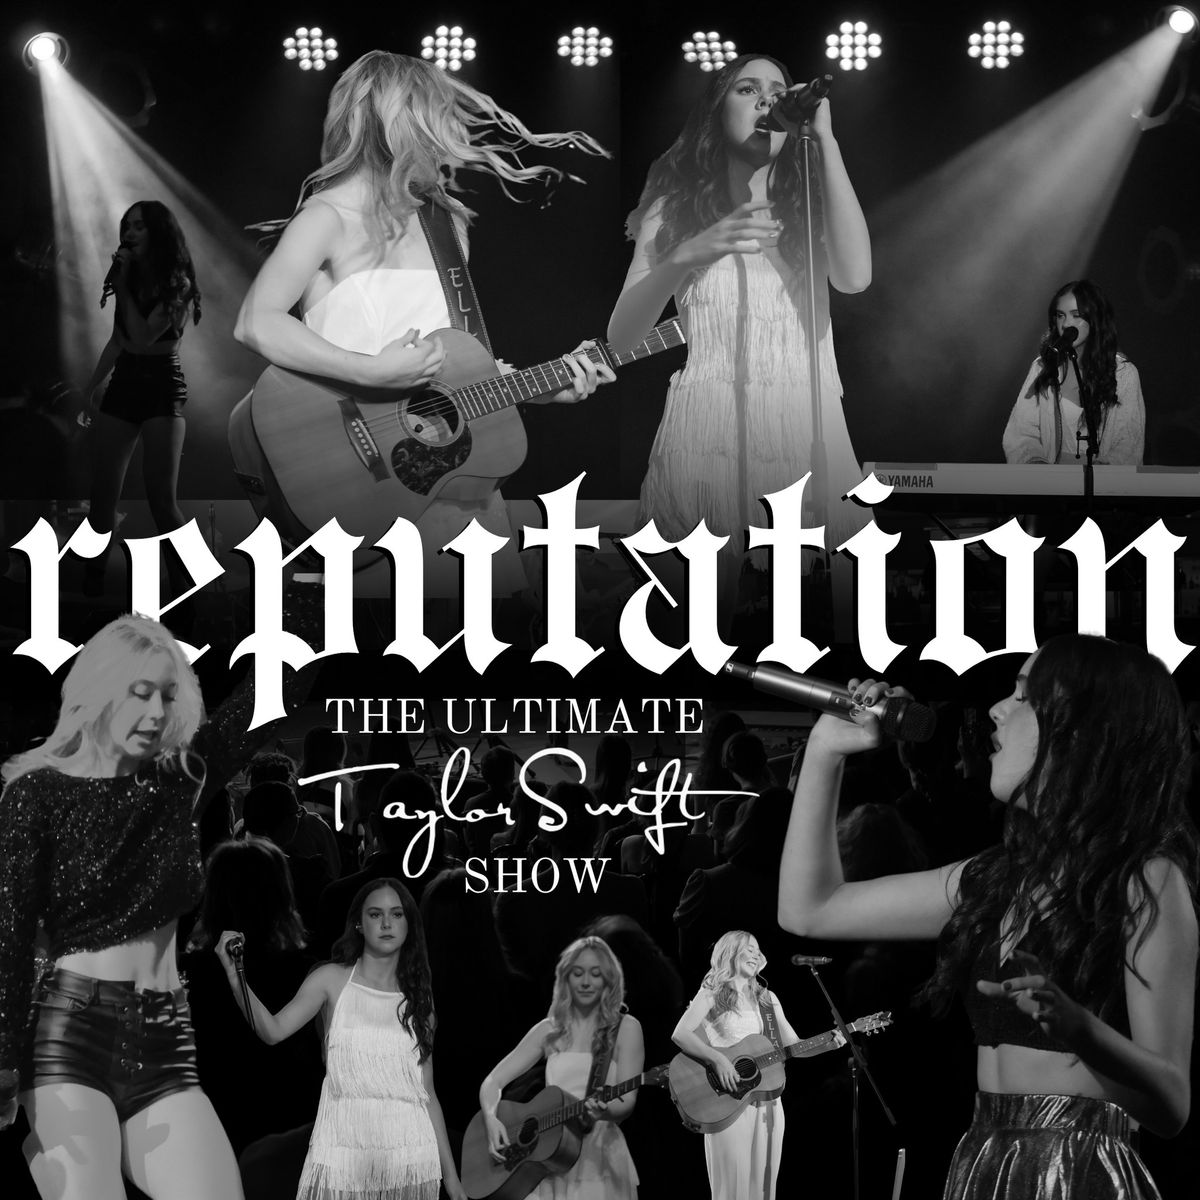 REPUTATION: The Ultimate Taylor Swift Show | CANBERRA, ACT